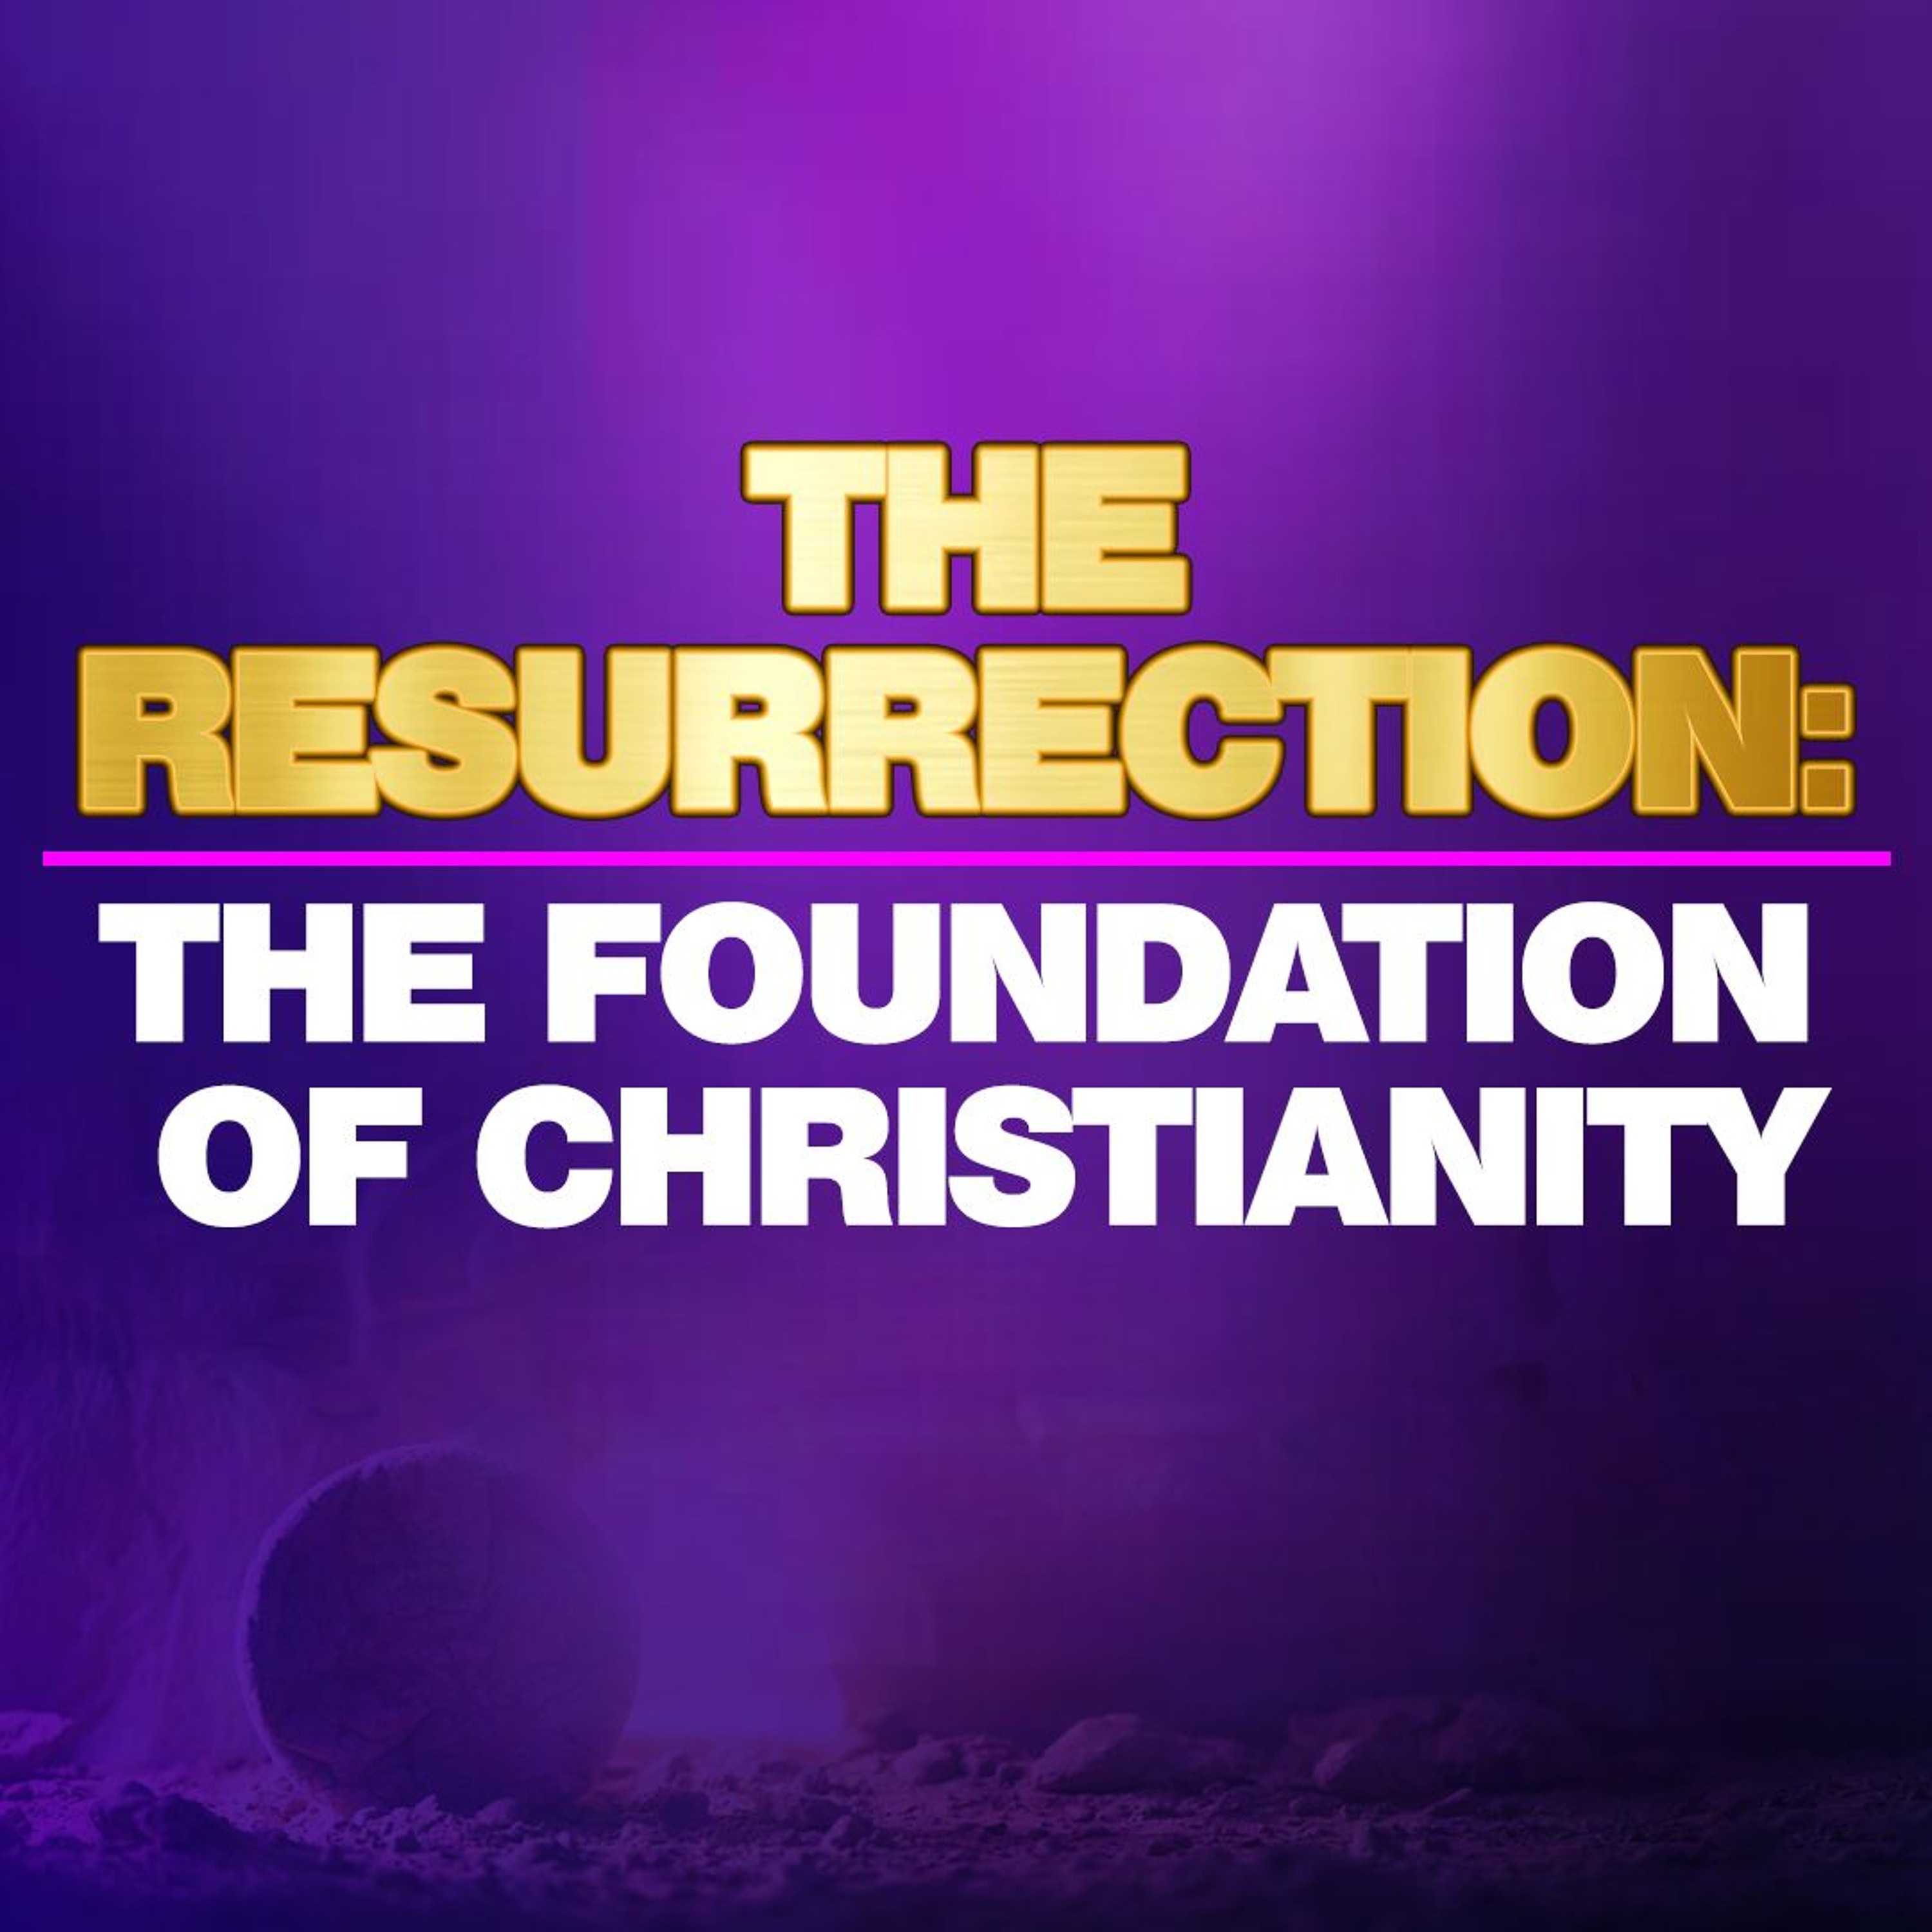 The RESURRECTION: The Foundation Of Christianity